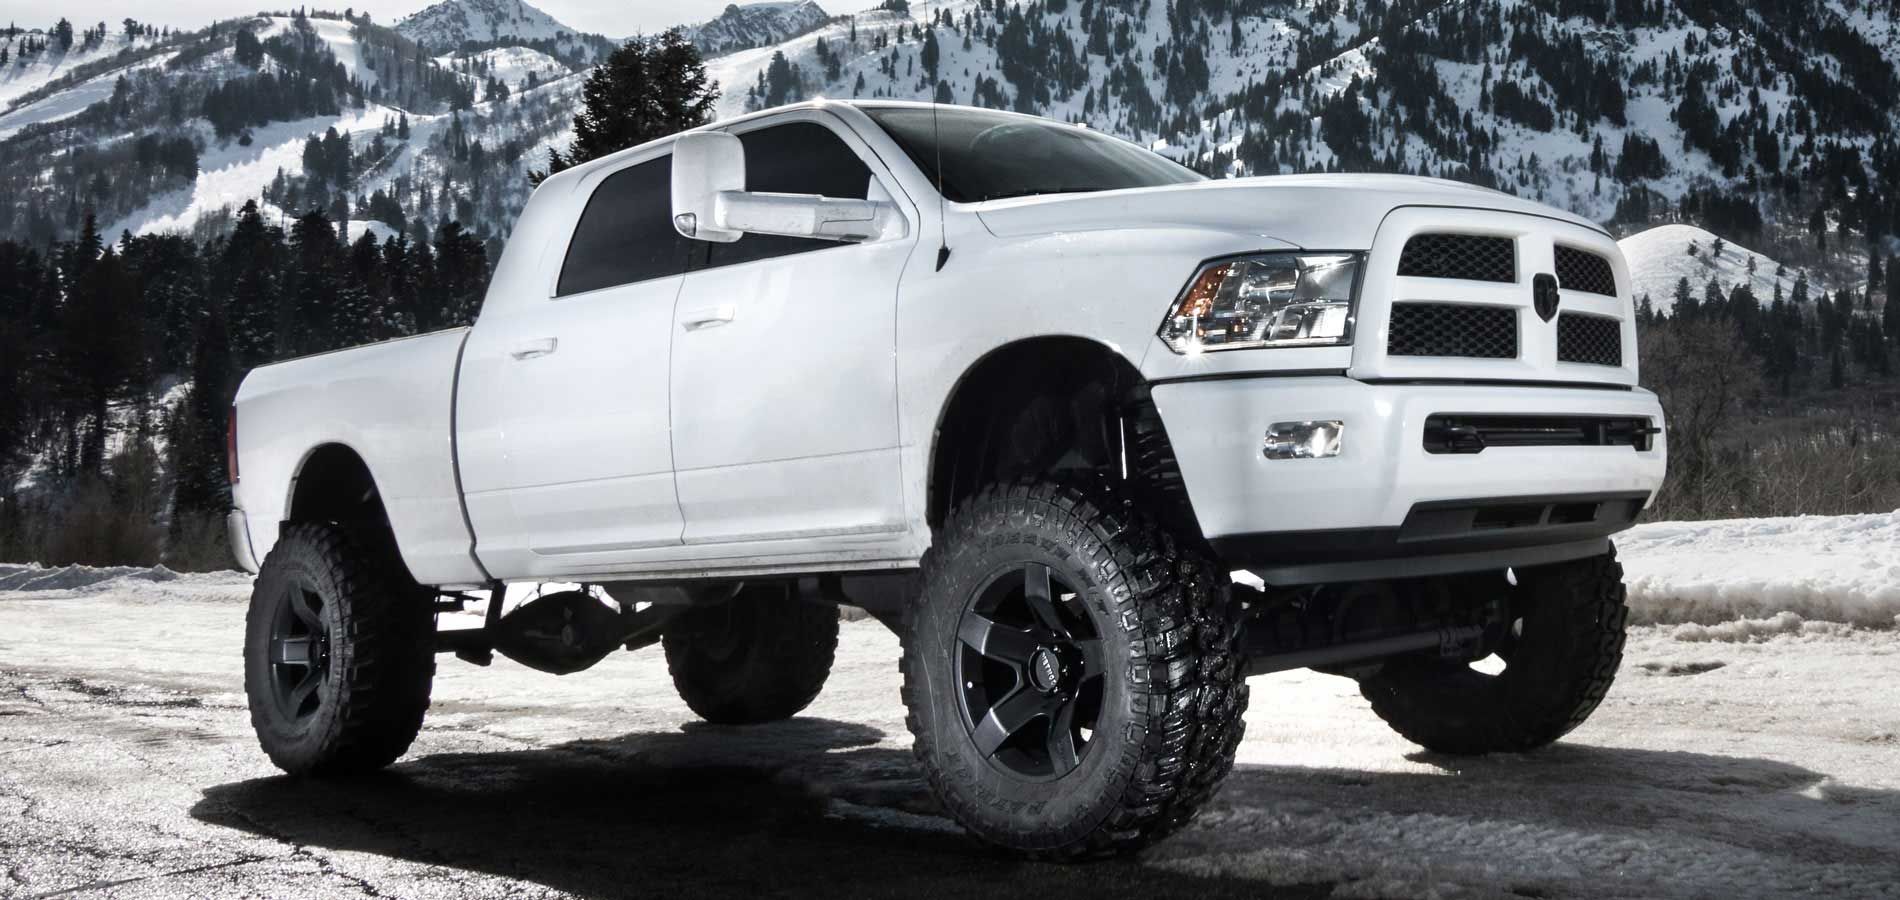 2013 Dodge Ram customized by the Diesel Brothers